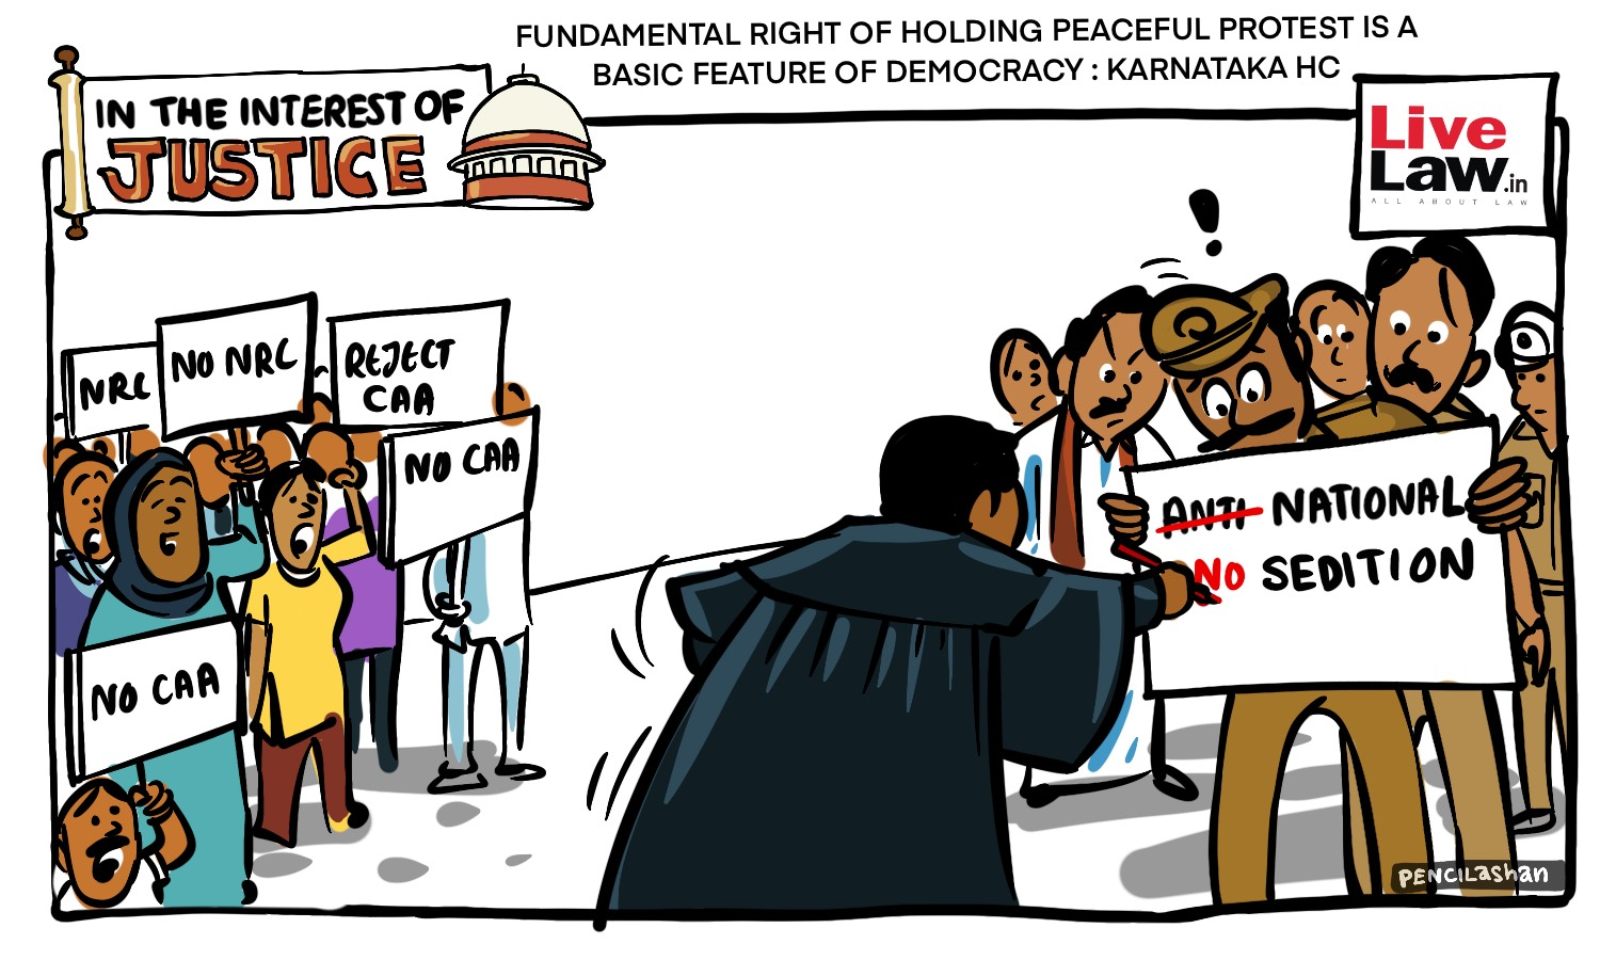 CARTOON] Fundamental Right Of Holding Peaceful Protest Is A Basic Feature  Of Democracy : Karnataka HC